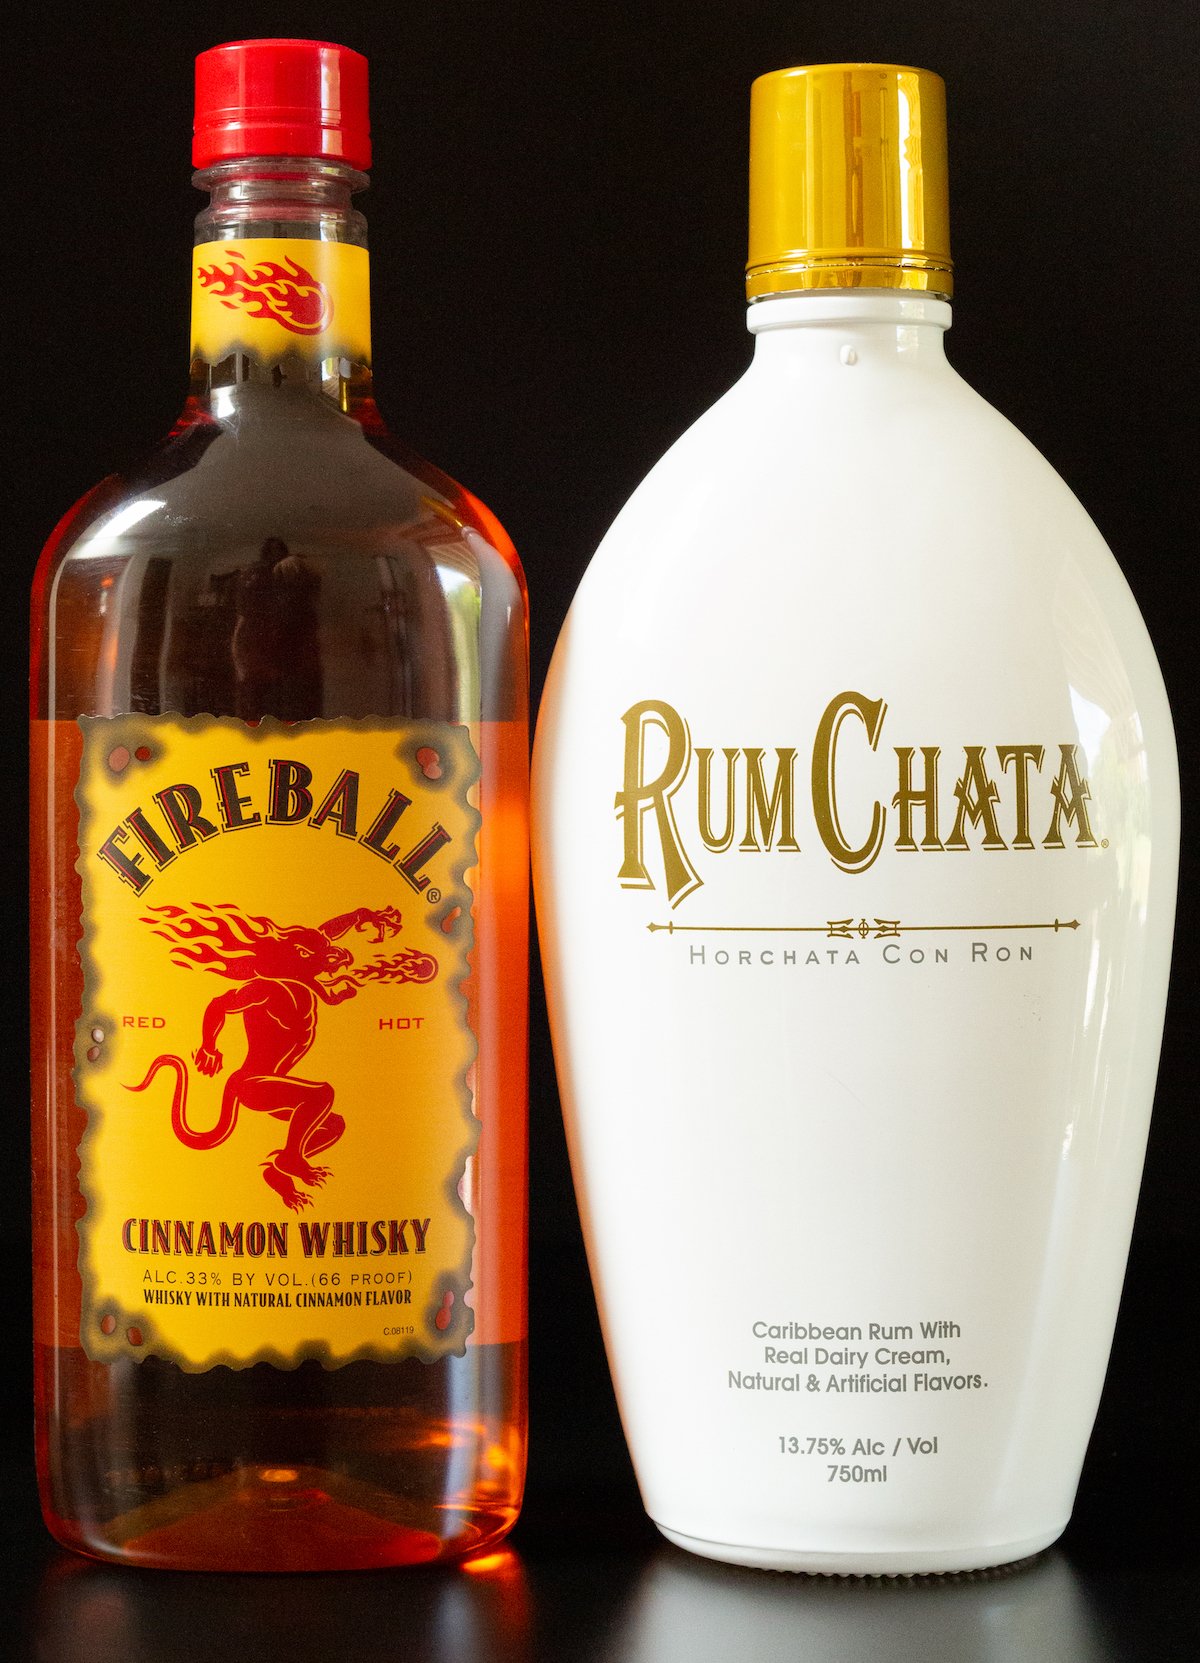 A bottle of Fireball whiskey and RumChata on a black background.